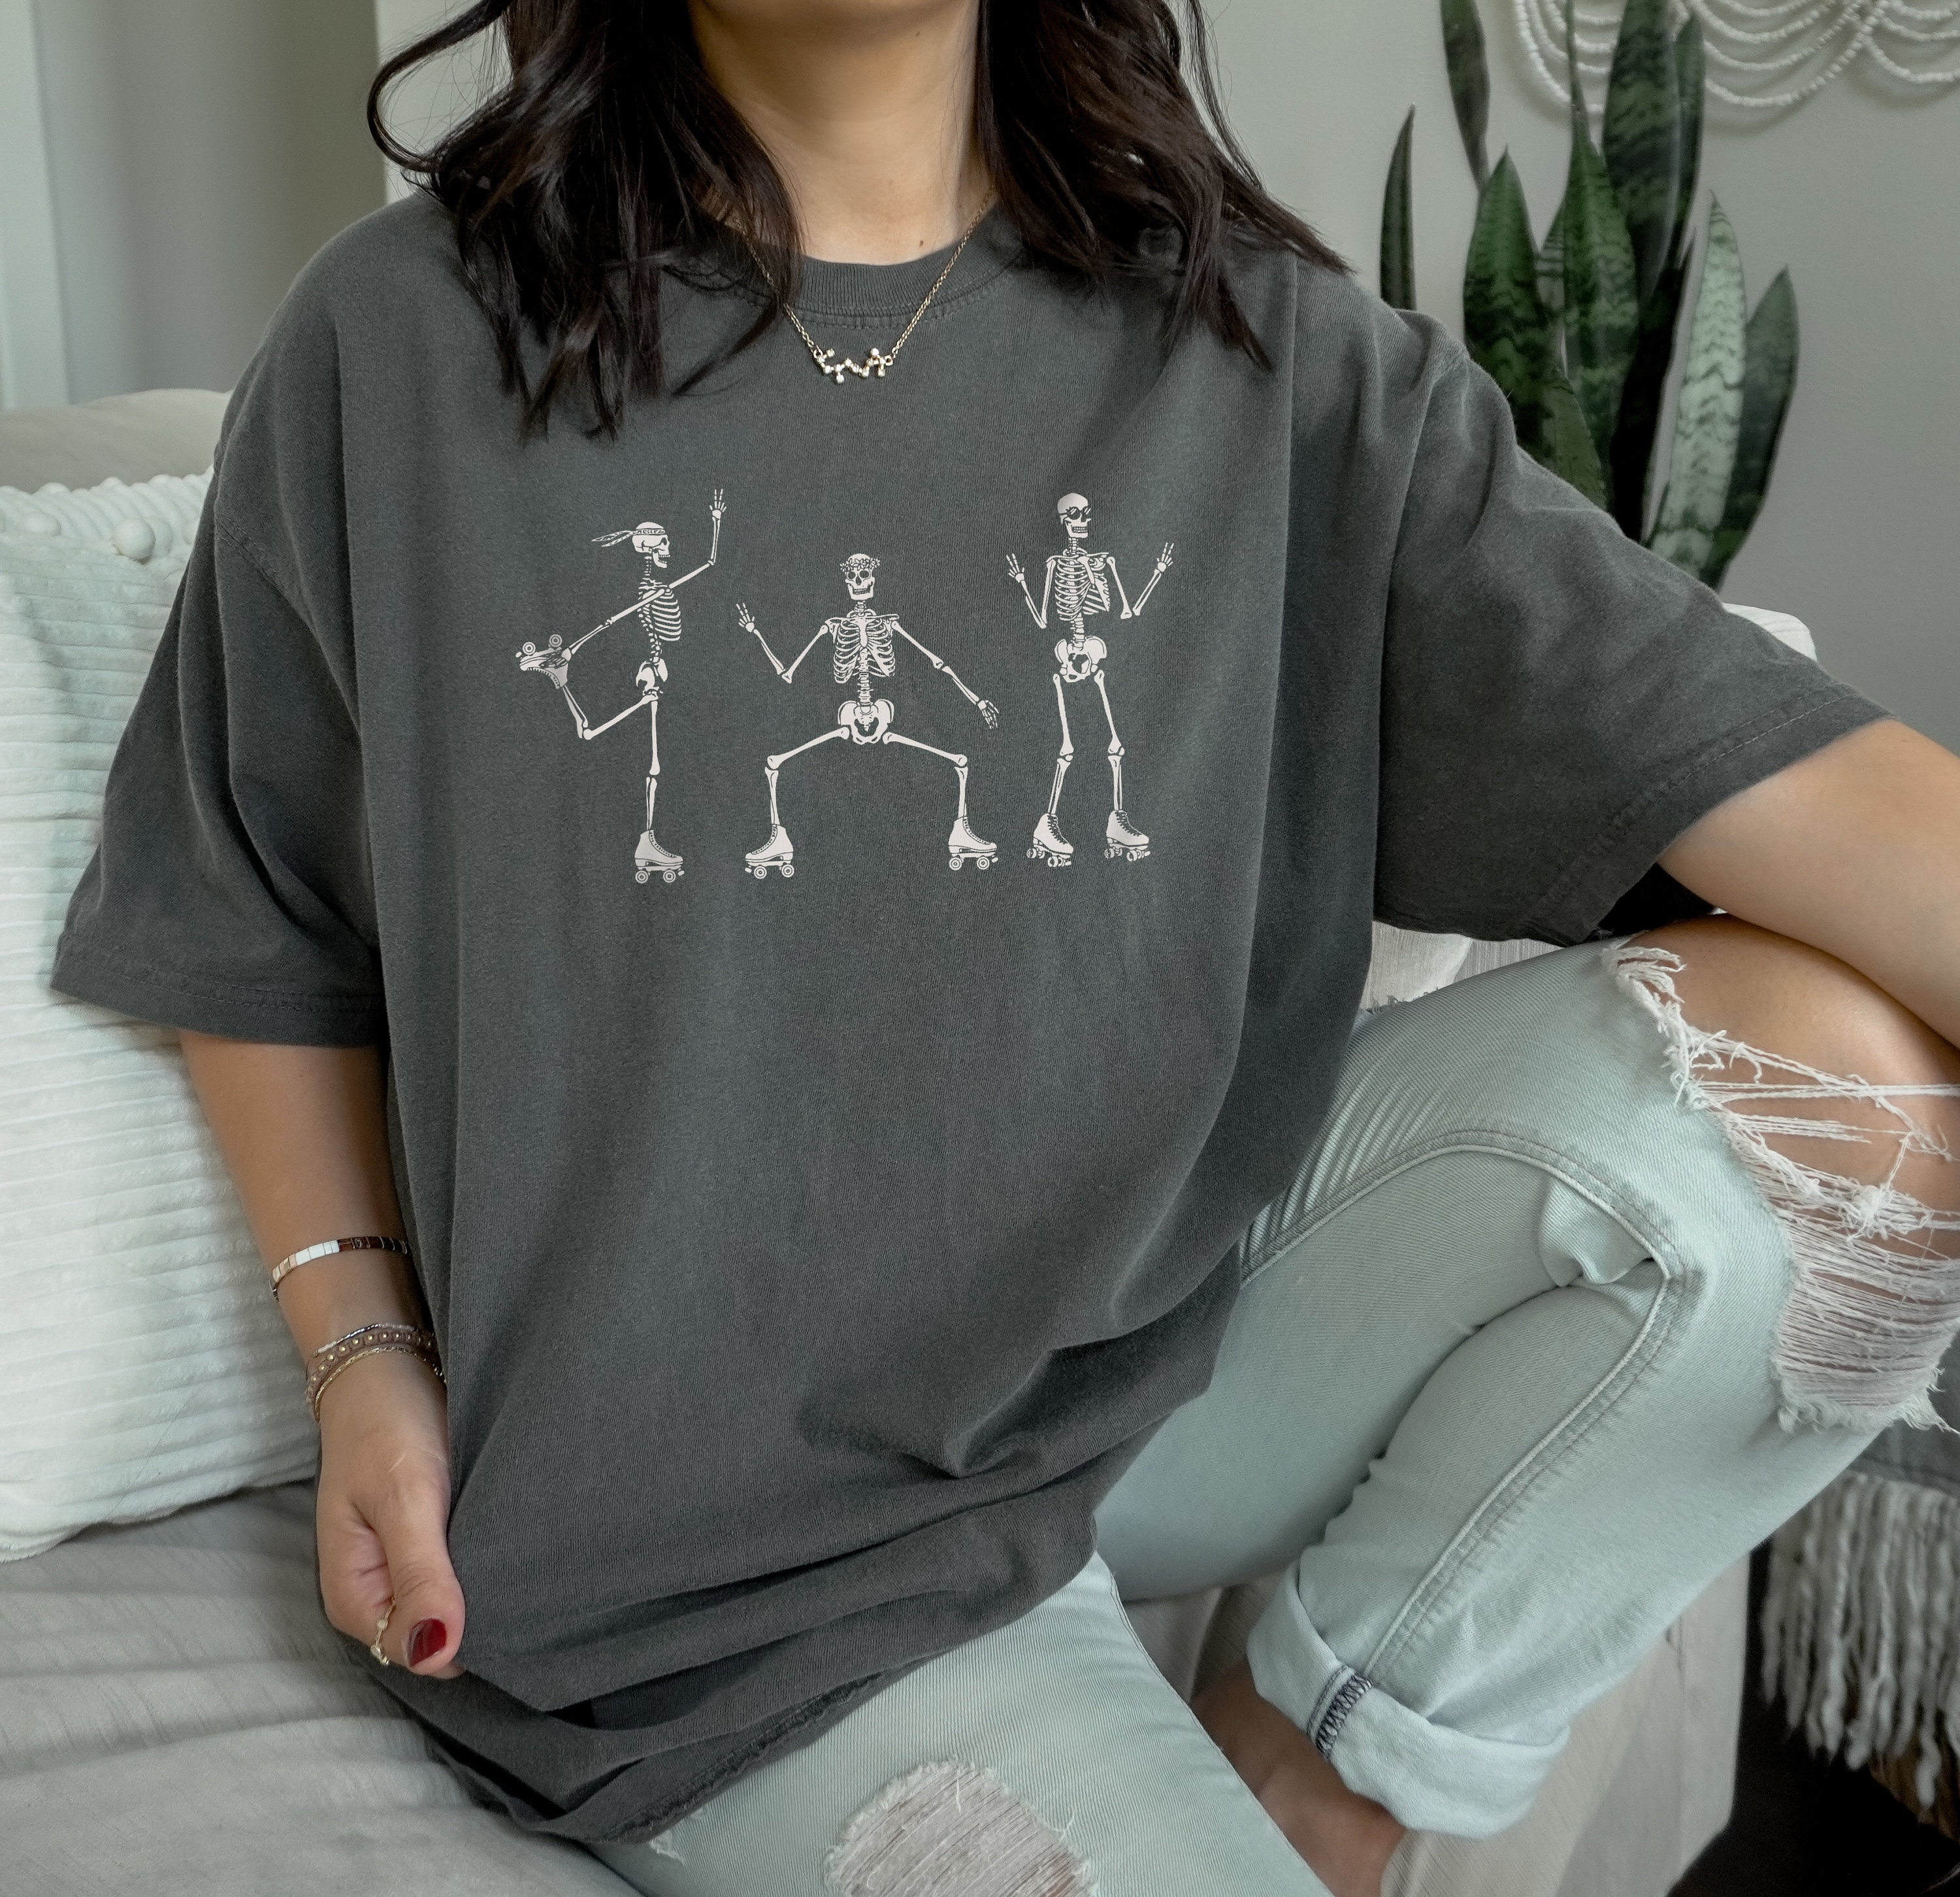 Discover Roller Skating Skeletons T-Shirt - Cozy Fall Tee, Vintage Look and Feel Oversized Shirt for Halloween